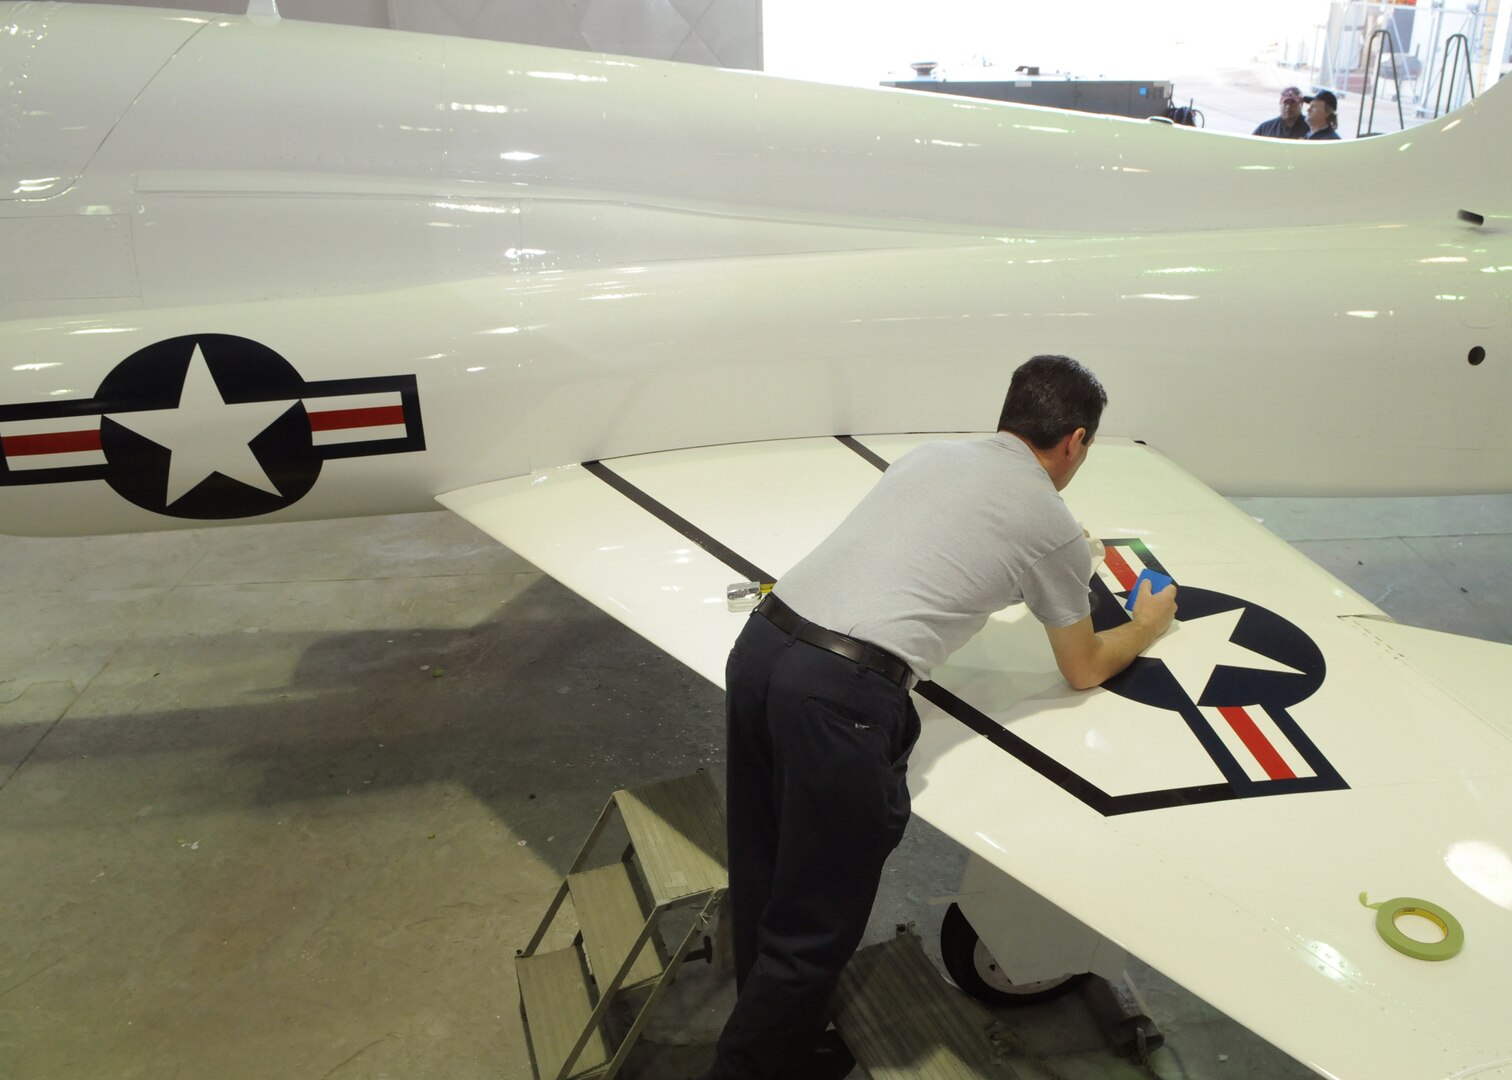 Neil Orlowski, 12th Flying Training Wing corrosion control, applies new decals to a T-38 Talon March 10. To mark the 50th anniversary of service, the aircraft was repainted to match the colors used on the aircraft during the 1960s. The T-38 celebrates 50 years of service March 17. (U.S. Air Force photo/David Terry)